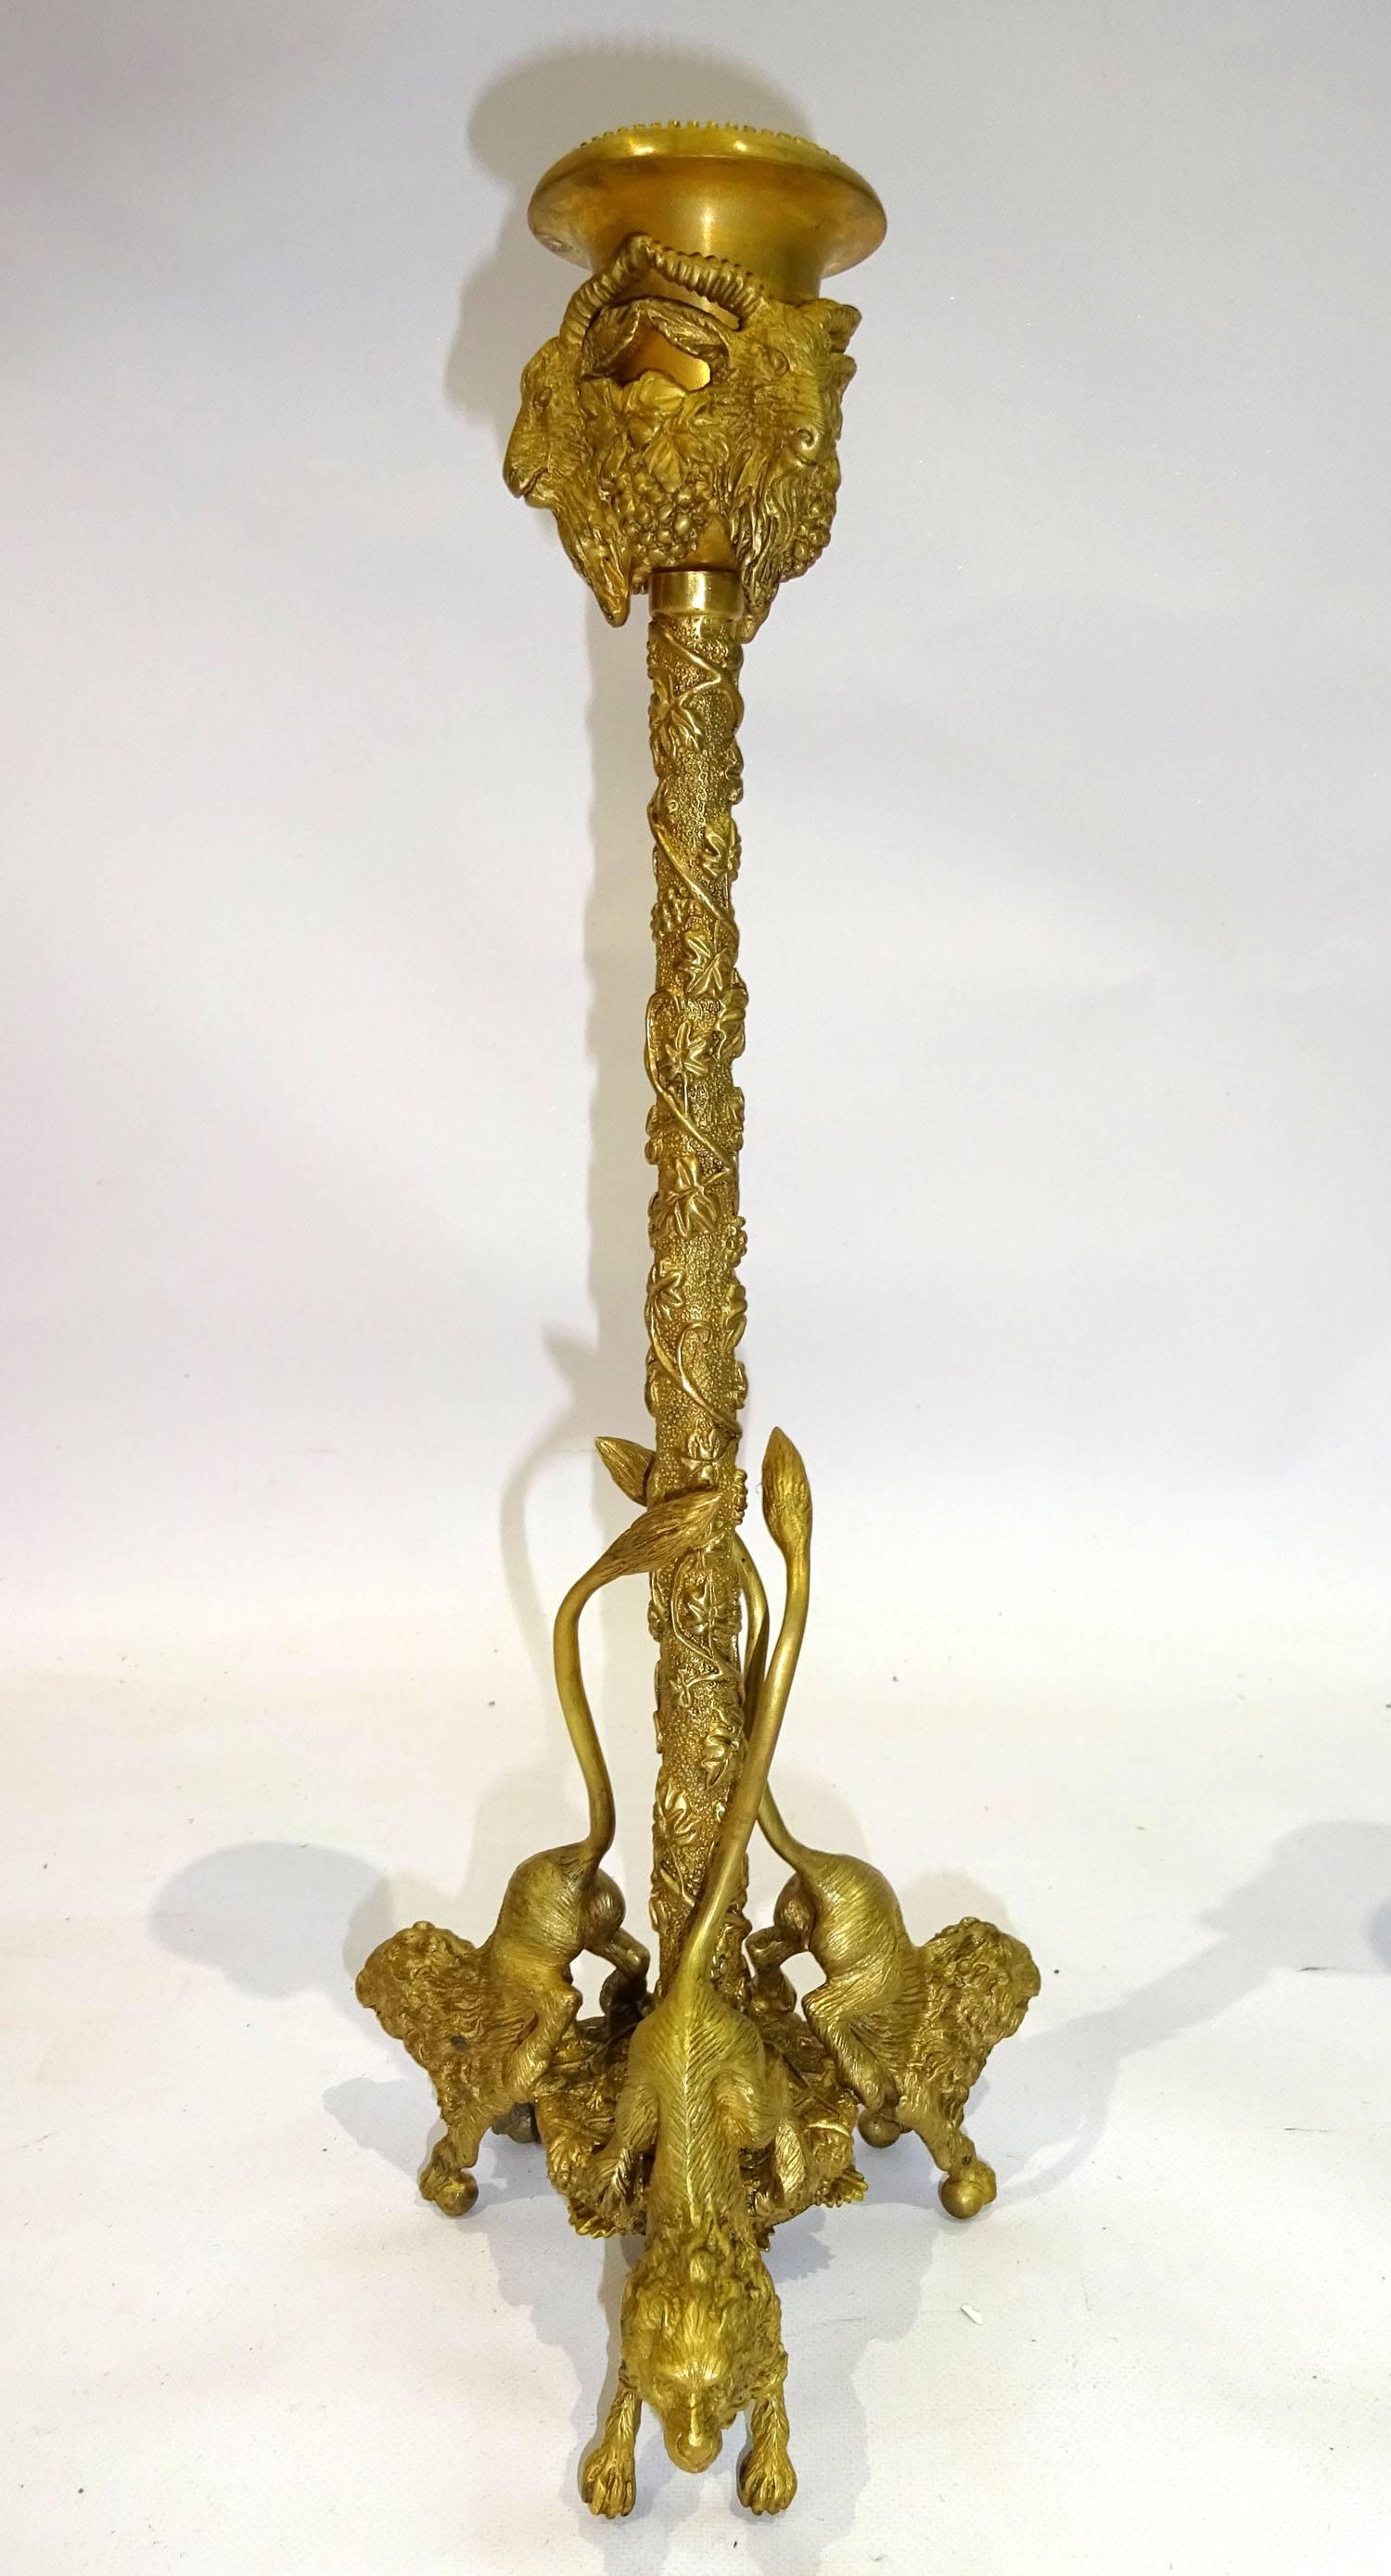 Pair of 20th century French candlesticks with beaded trim to bobeche, rams' head mounts to cup, standard with pebbled ground and vine motif in high relief, terminating on figural lion feet.